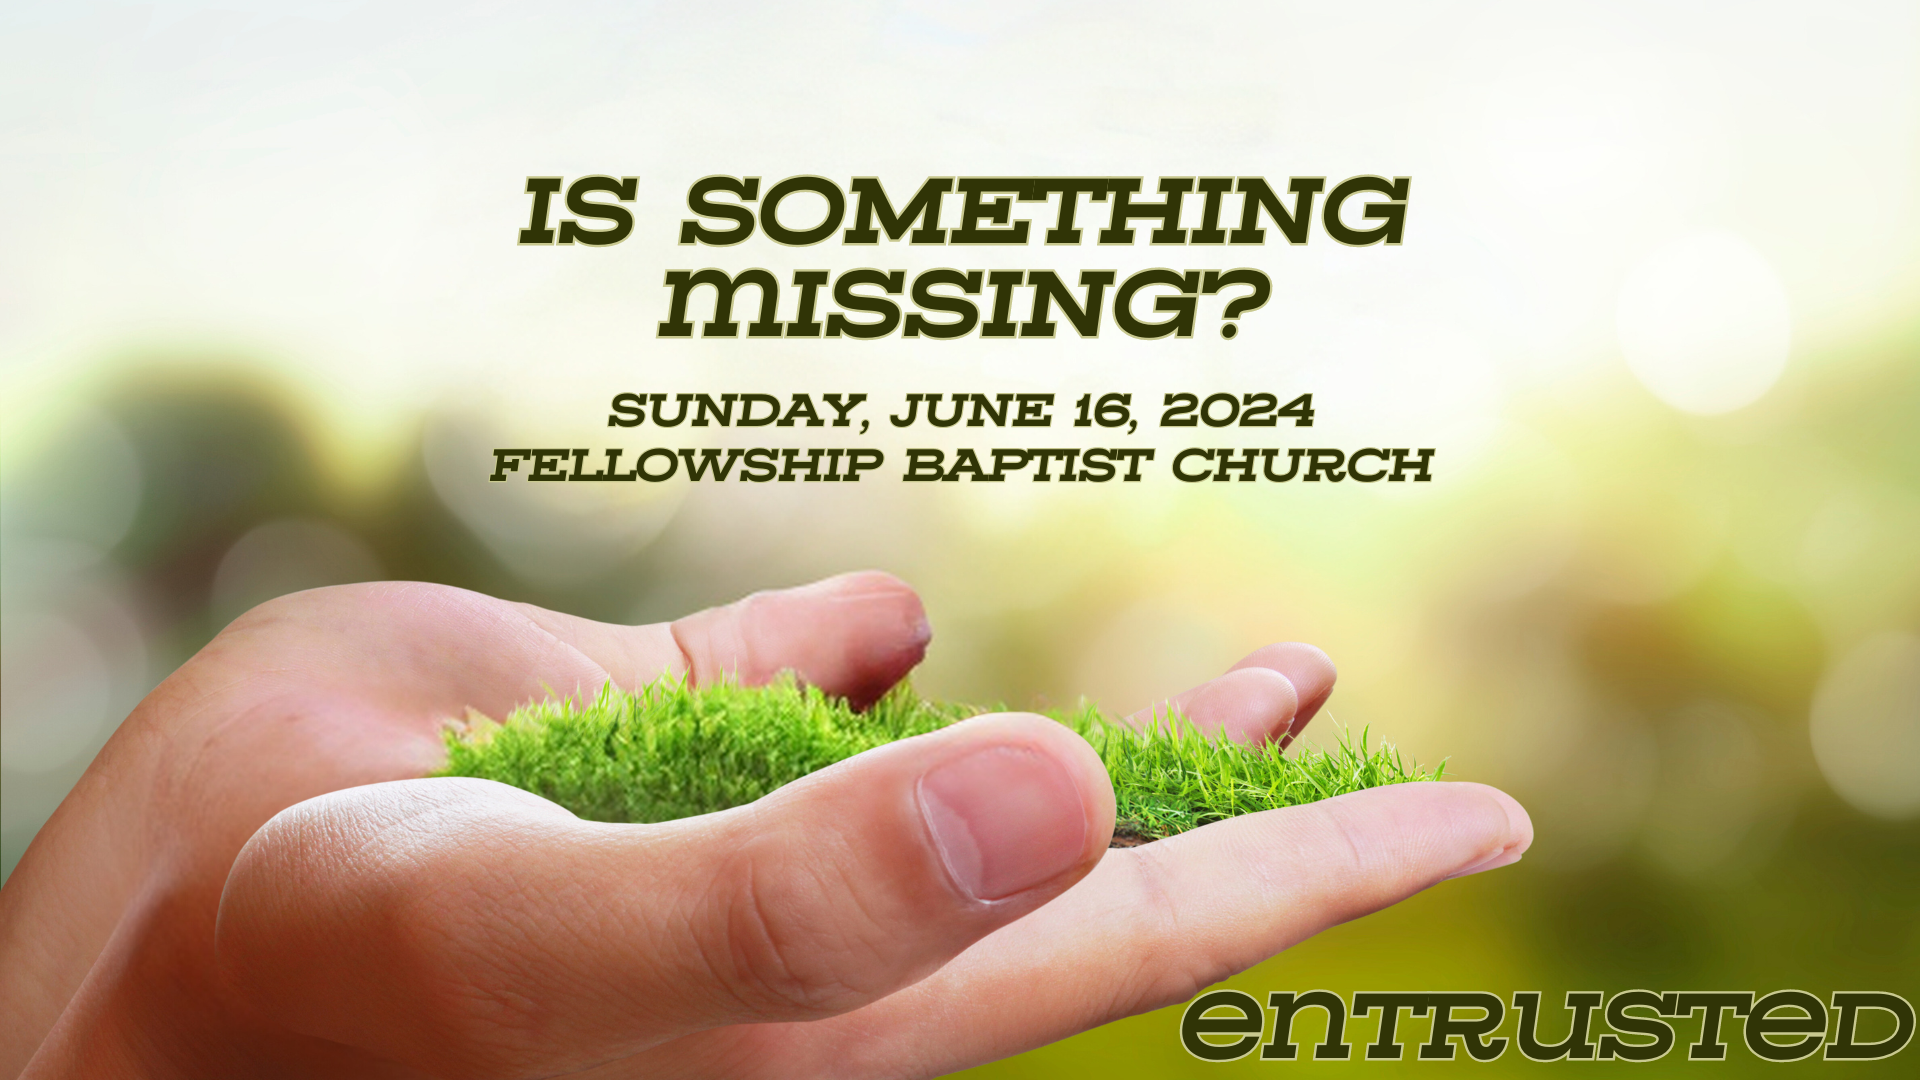 Entrusted: Is Something Missing?